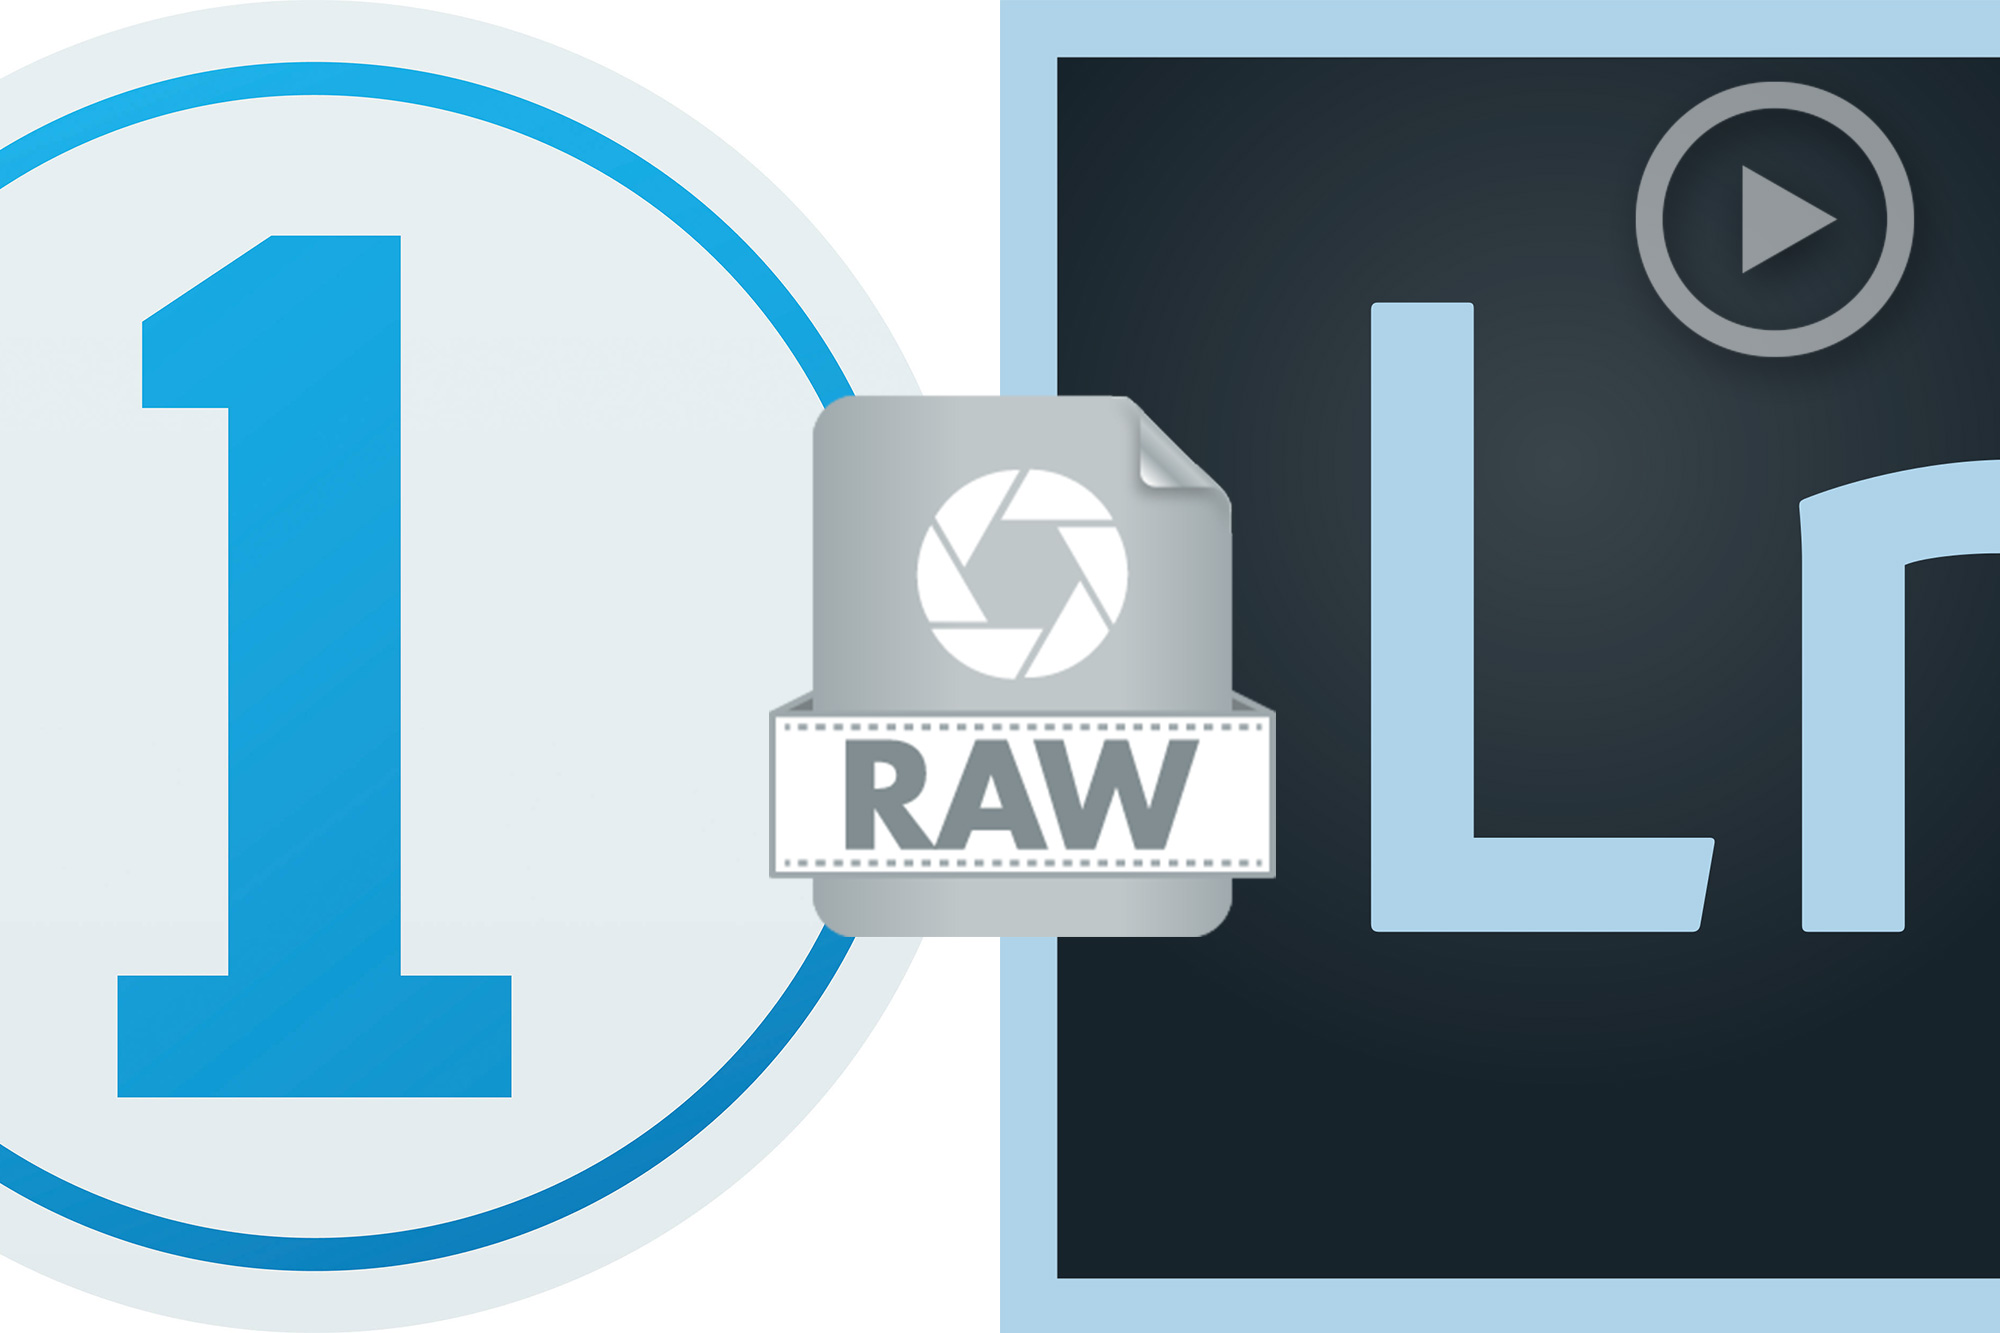 Capture One vs Lightroom: How Each Approaches RAW Images